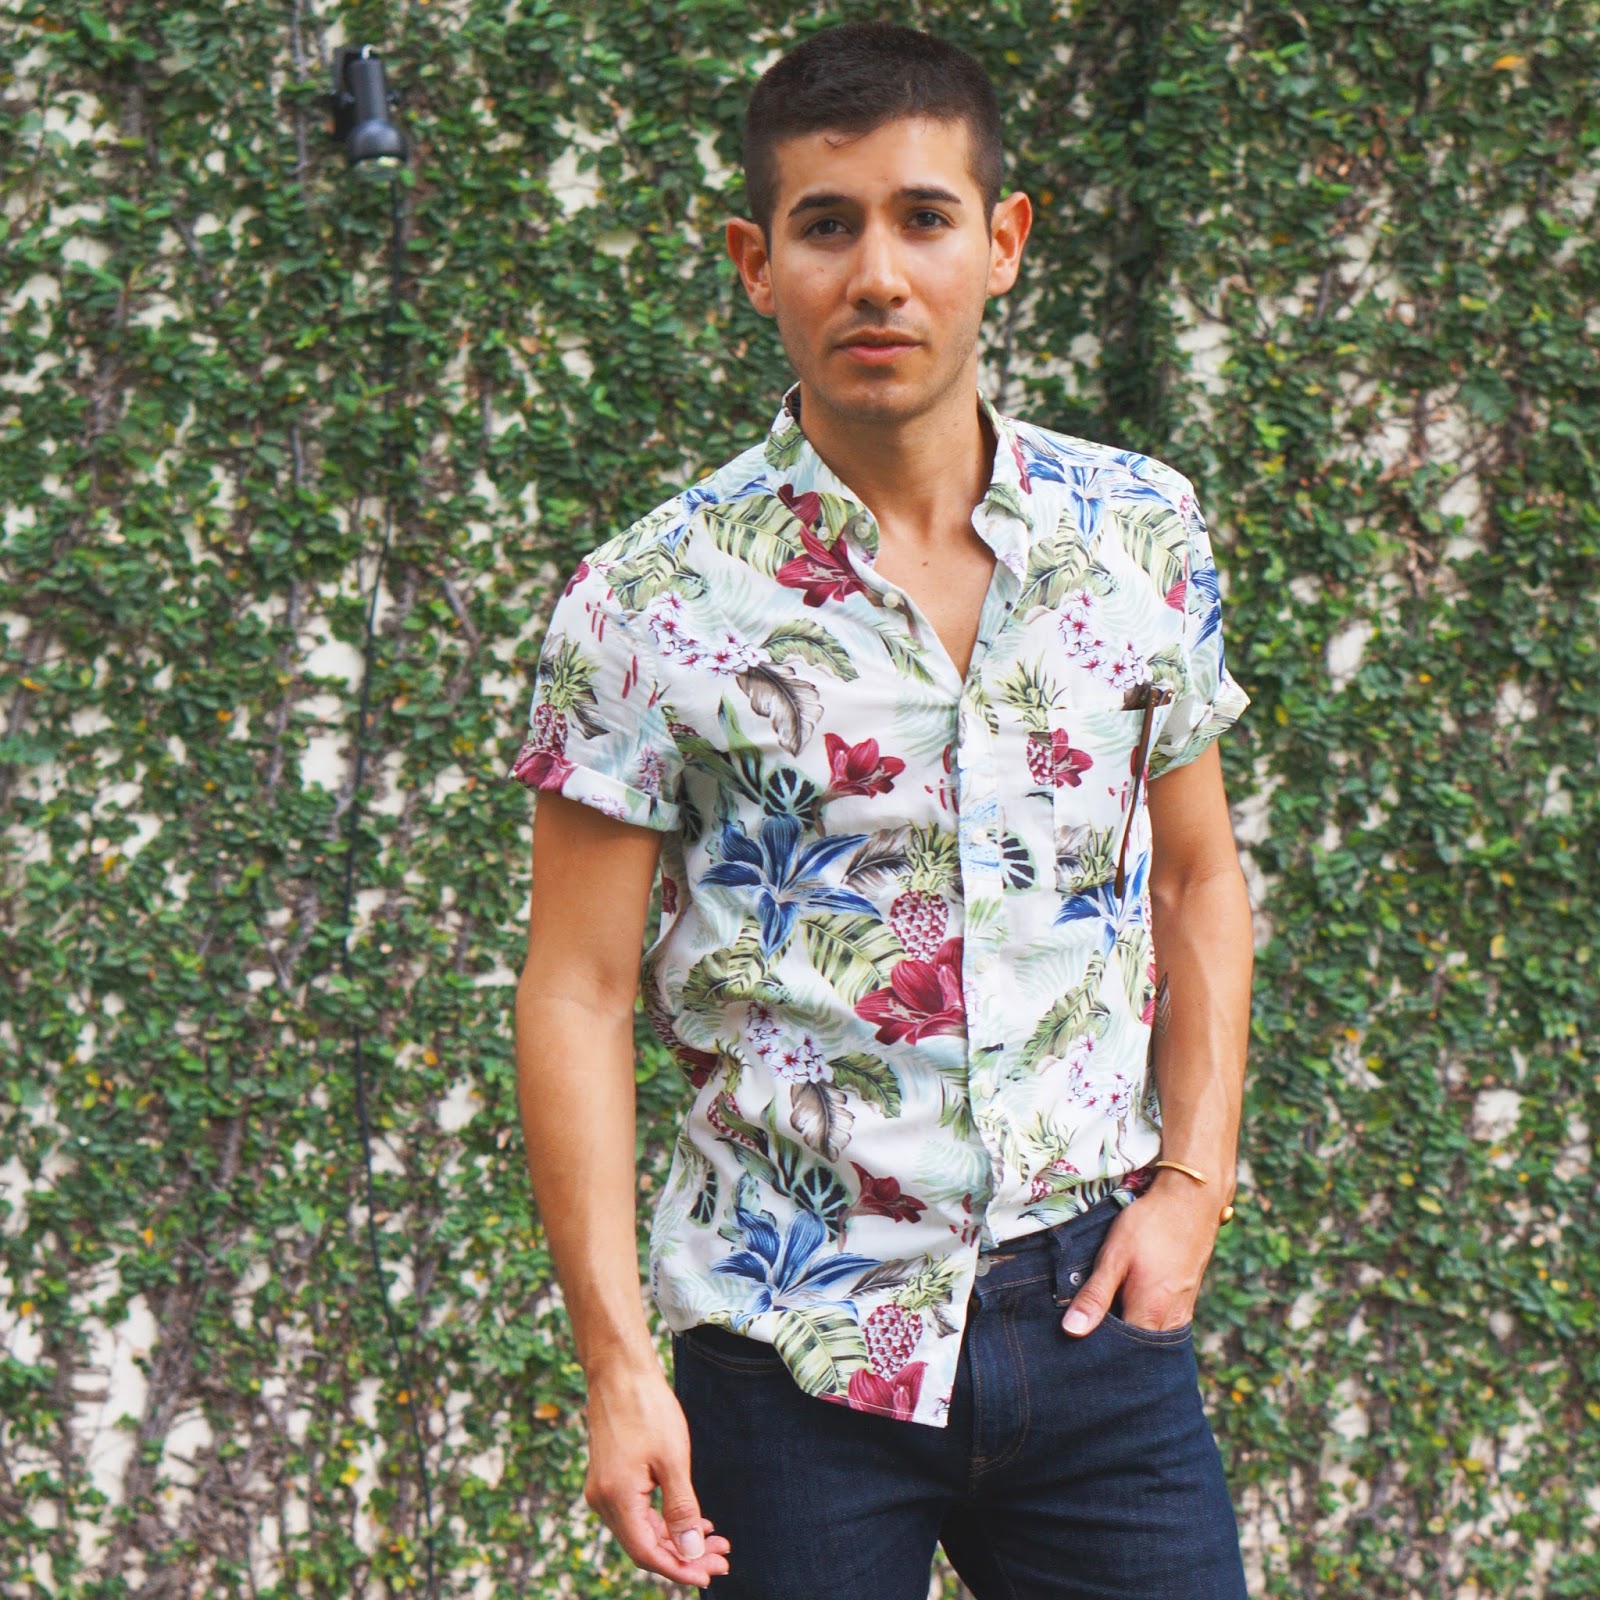 Floral Vibes - TREND STYLED • Style, Grooming, Design, and Travel ...